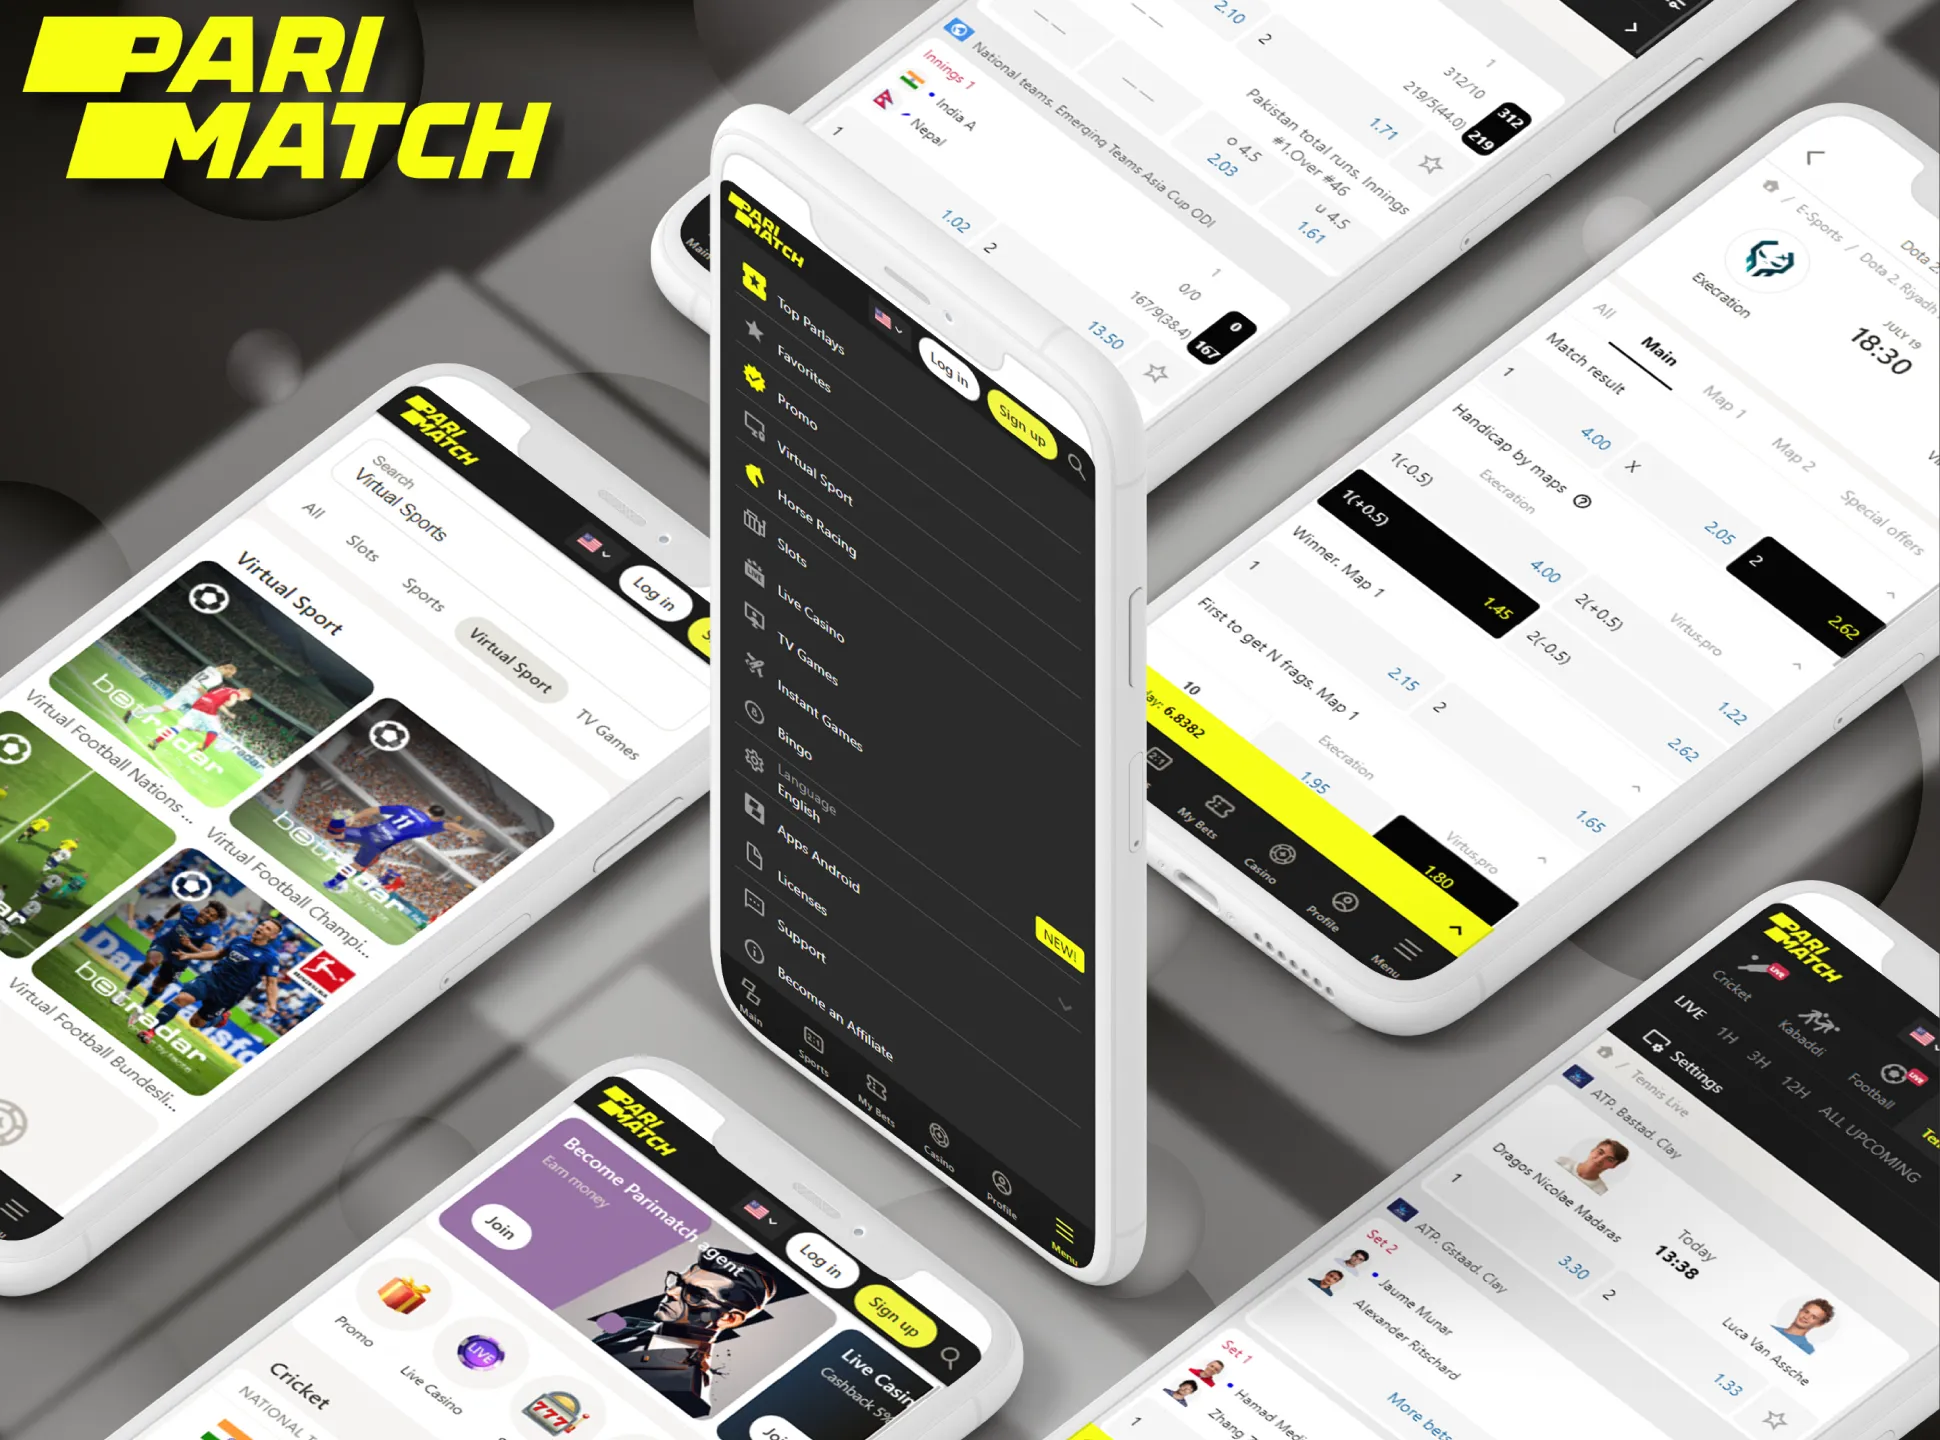 Parimatch is a convenient and user-friendly application for sports betting.